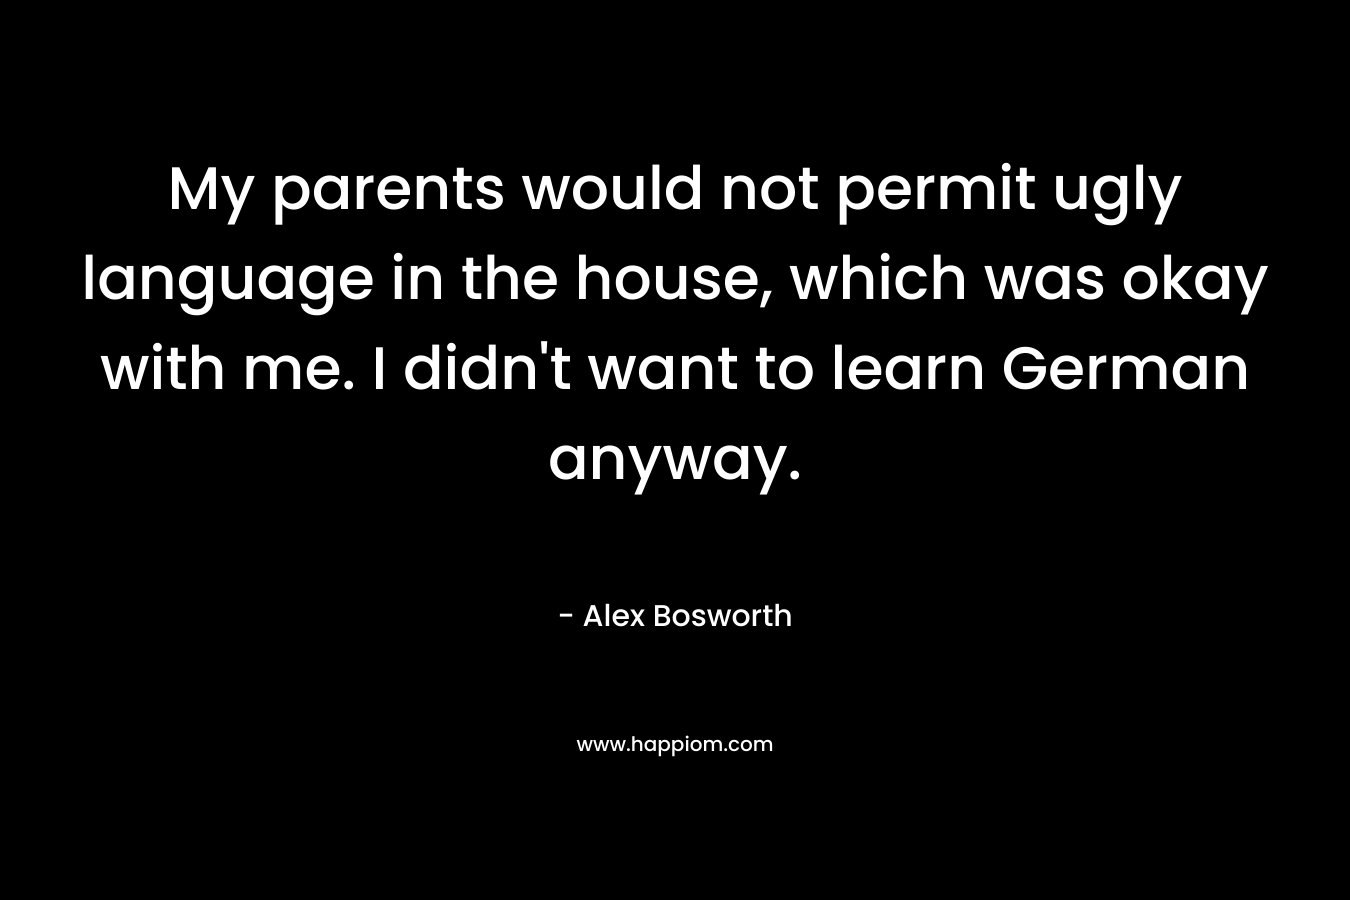 My parents would not permit ugly language in the house, which was okay with me. I didn’t want to learn German anyway. – Alex Bosworth